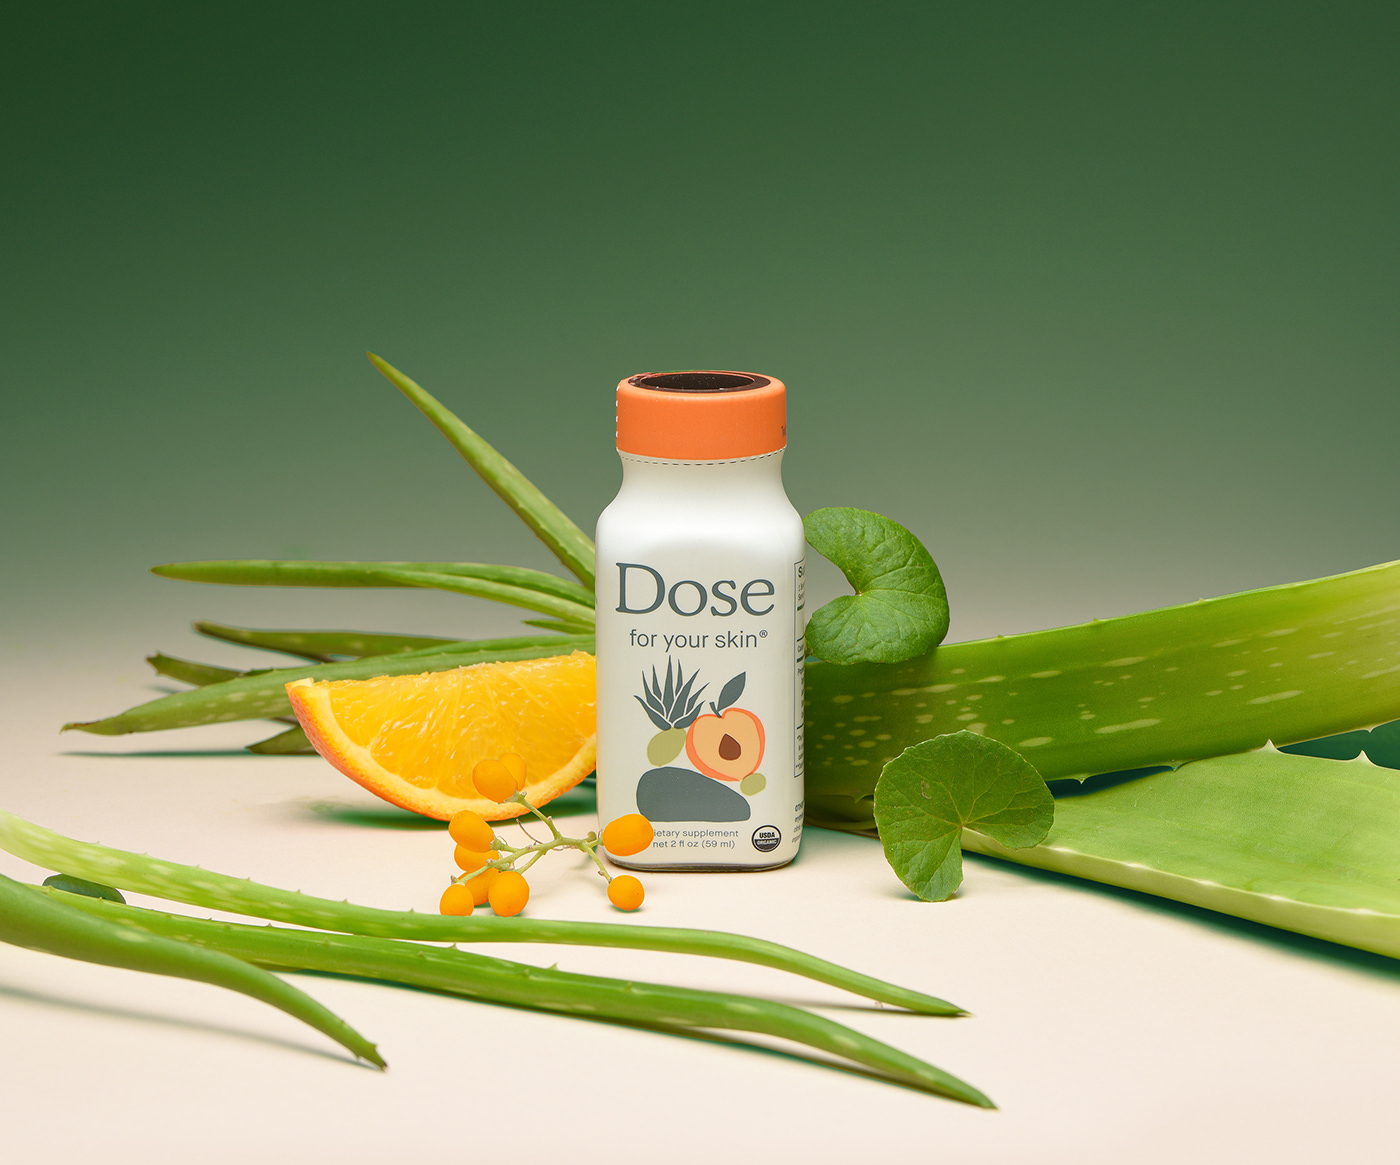 dose beverage Healthy drink bottle fresh herbs Colorful styling Creative styling dosedaily immunity shots organic Ingredeints